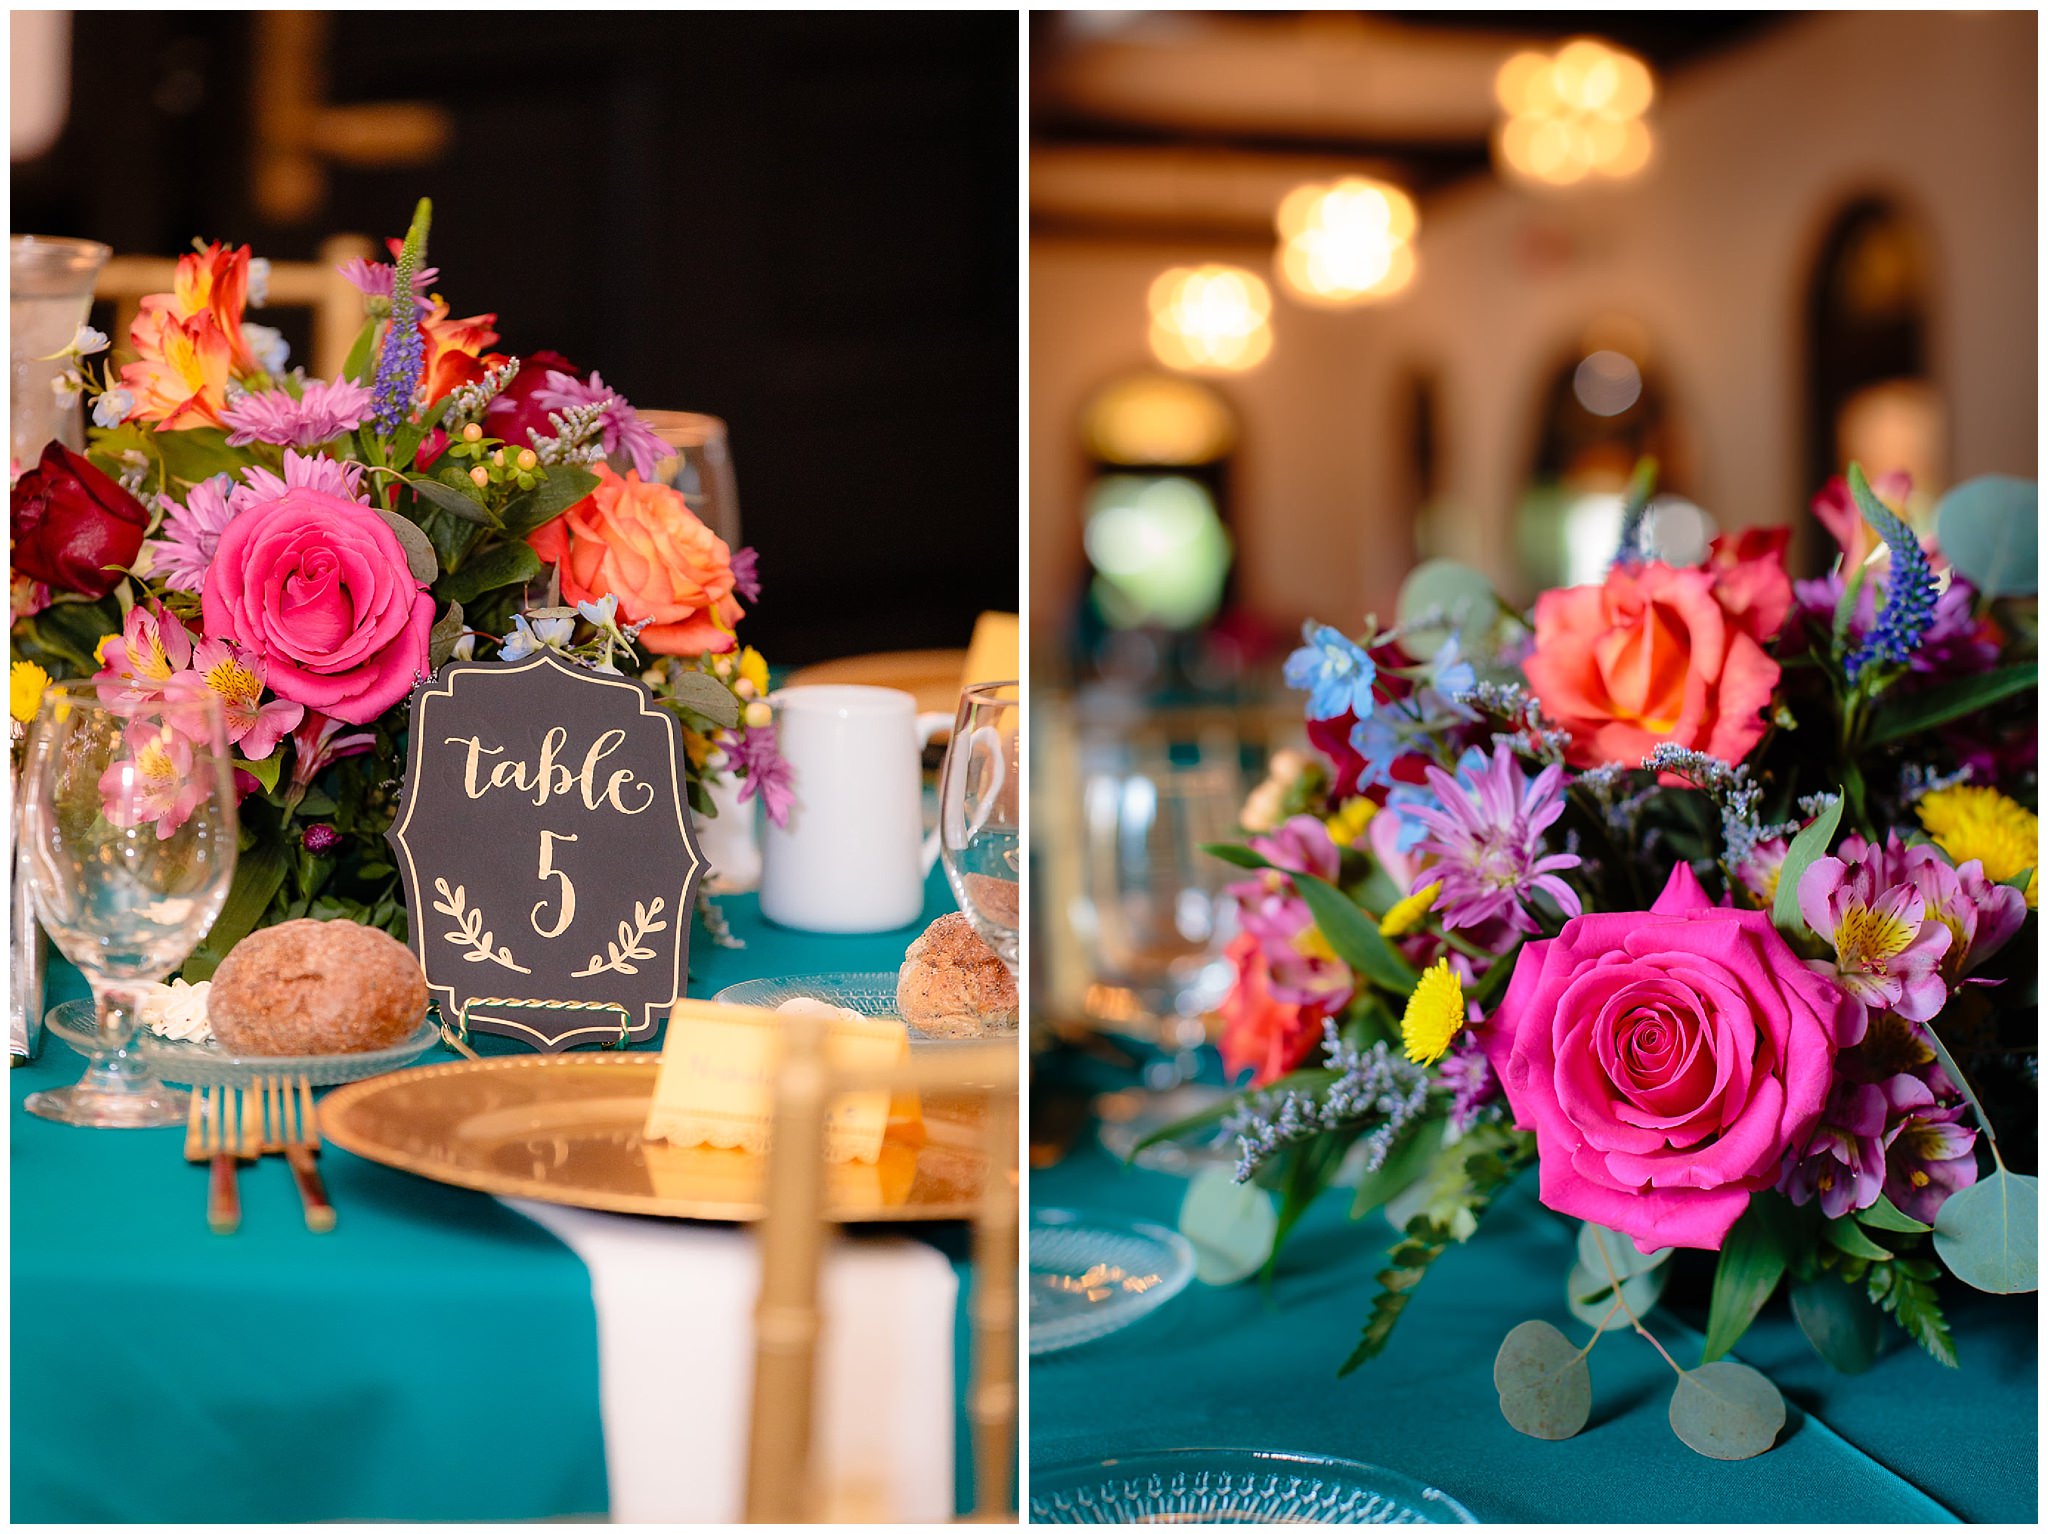 Colorful floral centerpieces by Patti's Petals Flower Shop at a Beaver Station wedding